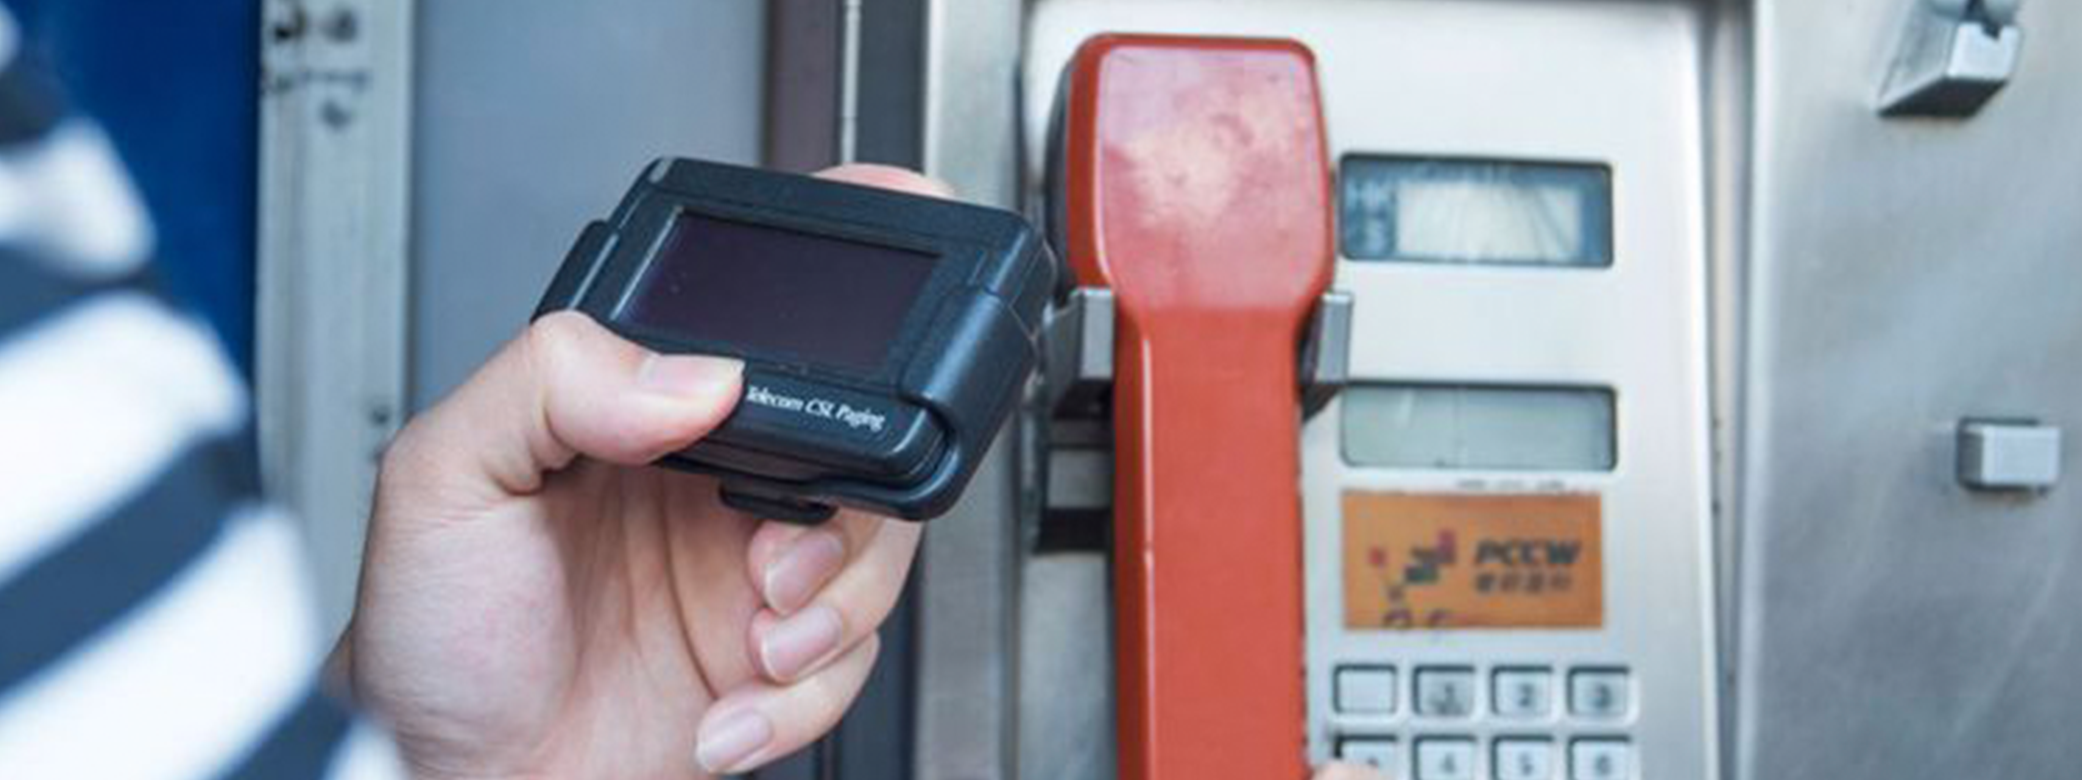 The End of an Era: Tokyo Telemessage No Longer Provides Pager Service